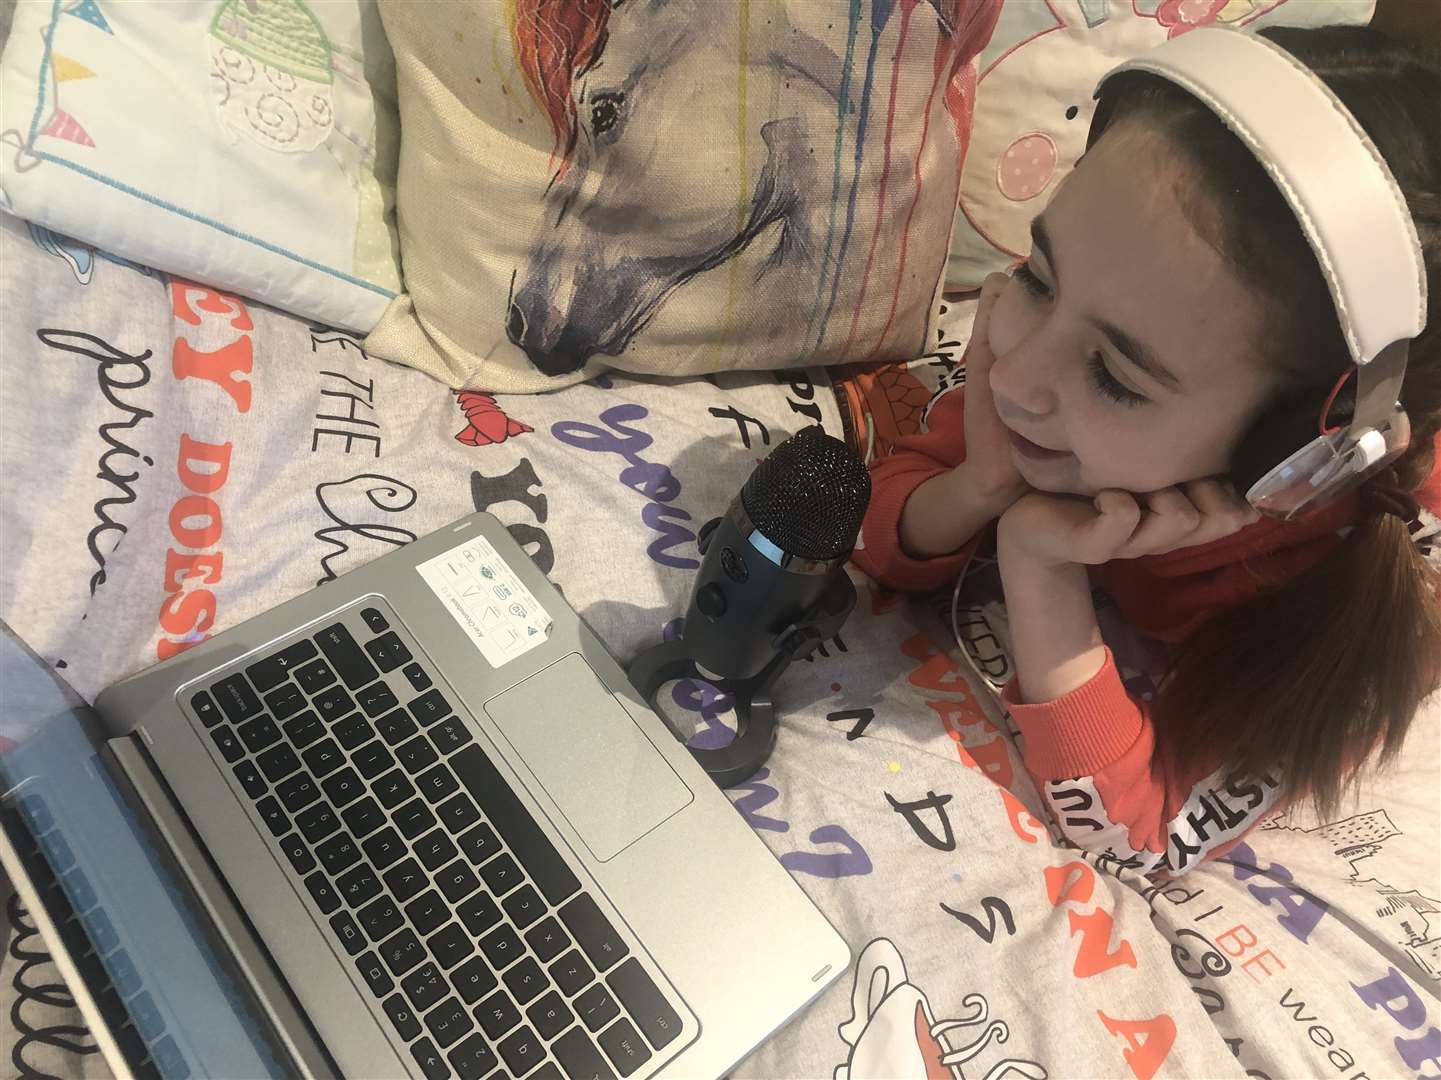 Zoe GIles, 11, has started her own podcast